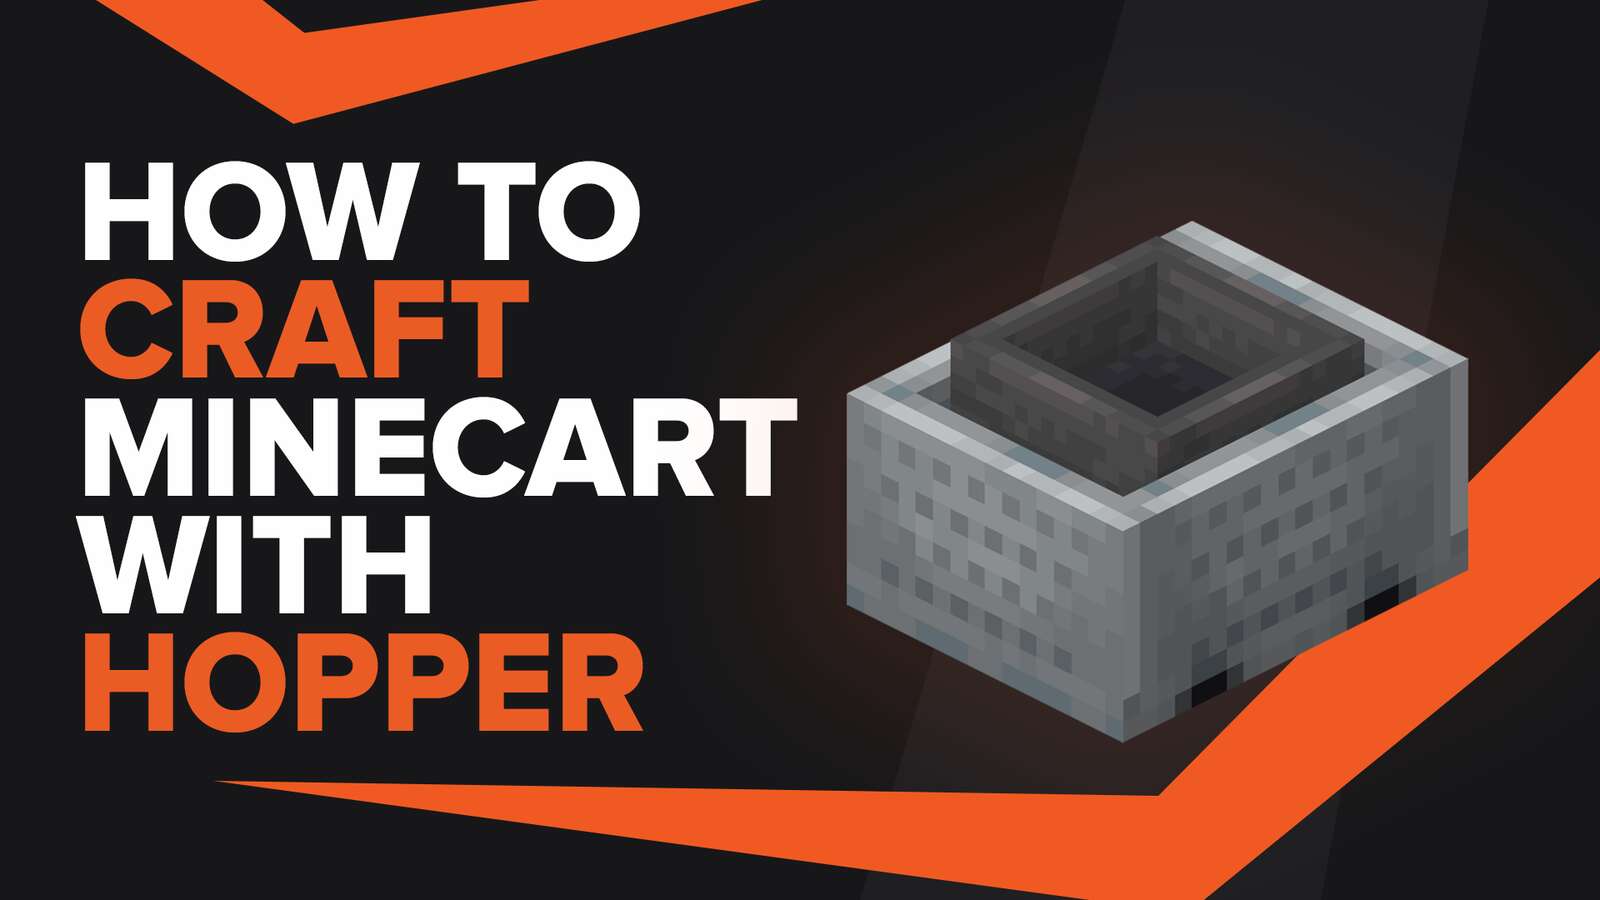 How To Make Minecart With Hopper In Minecraft